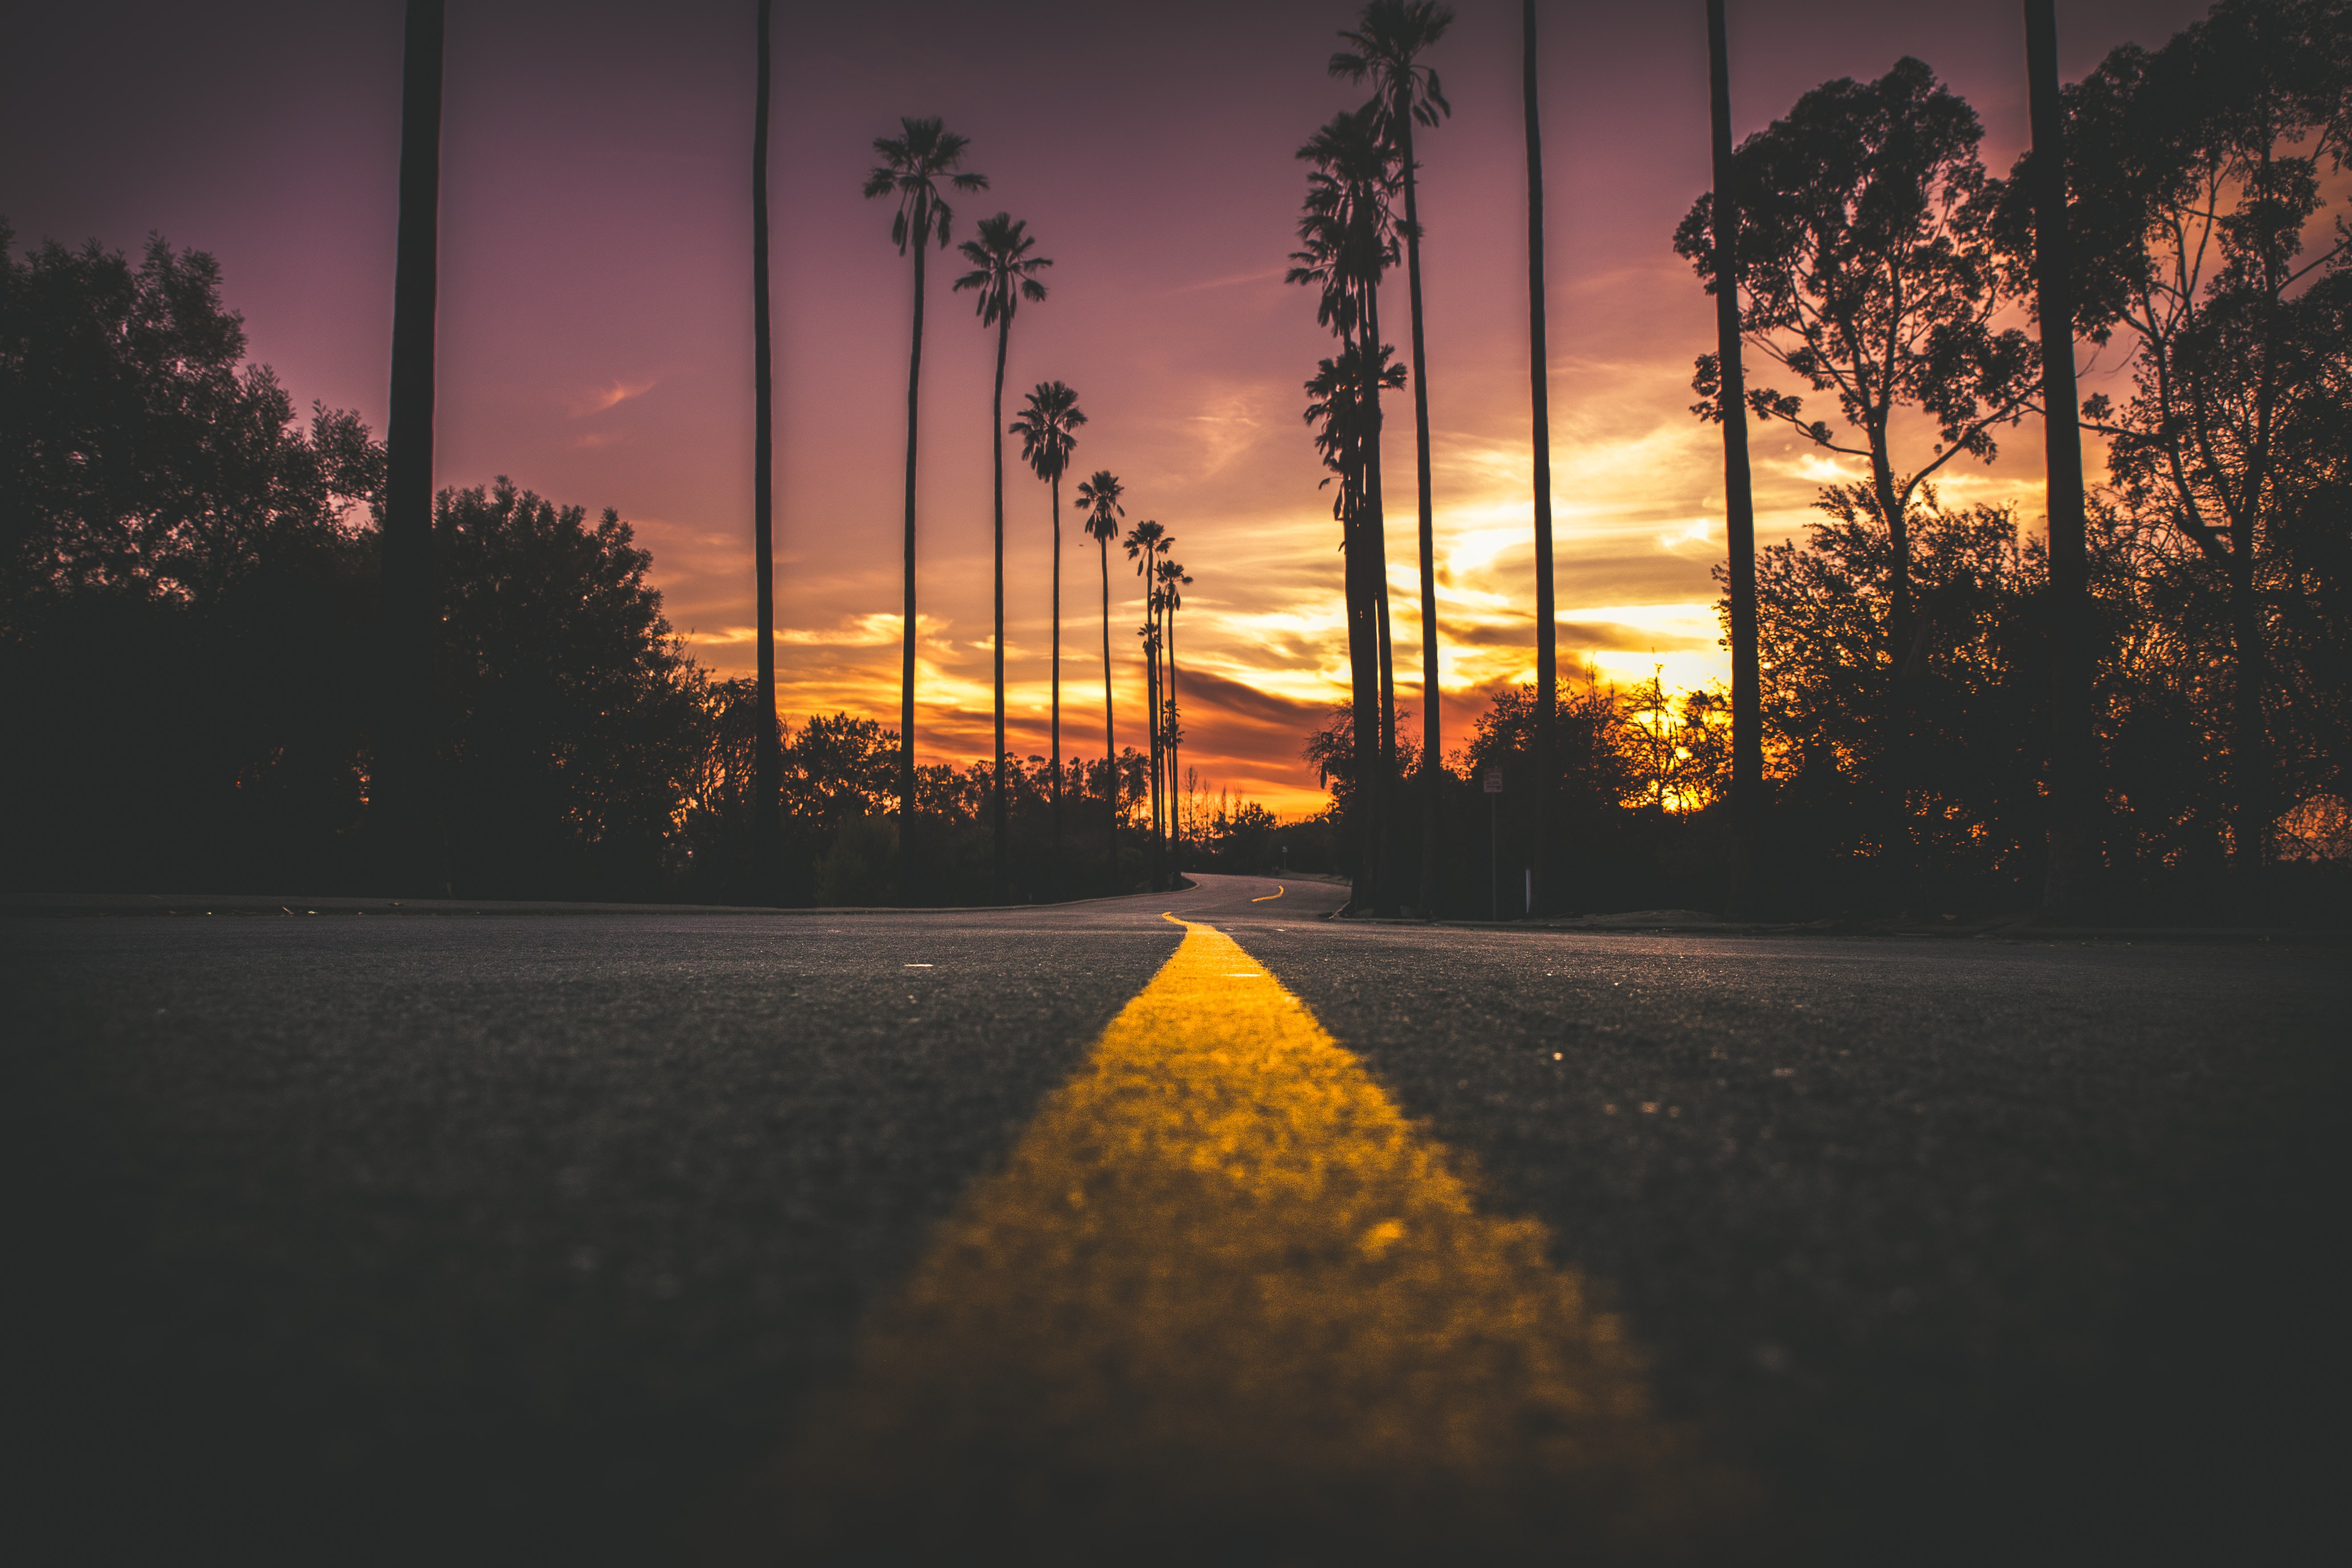 Road in City during Sunset, City, Dark, Dawn, Dusk, HQ Photo